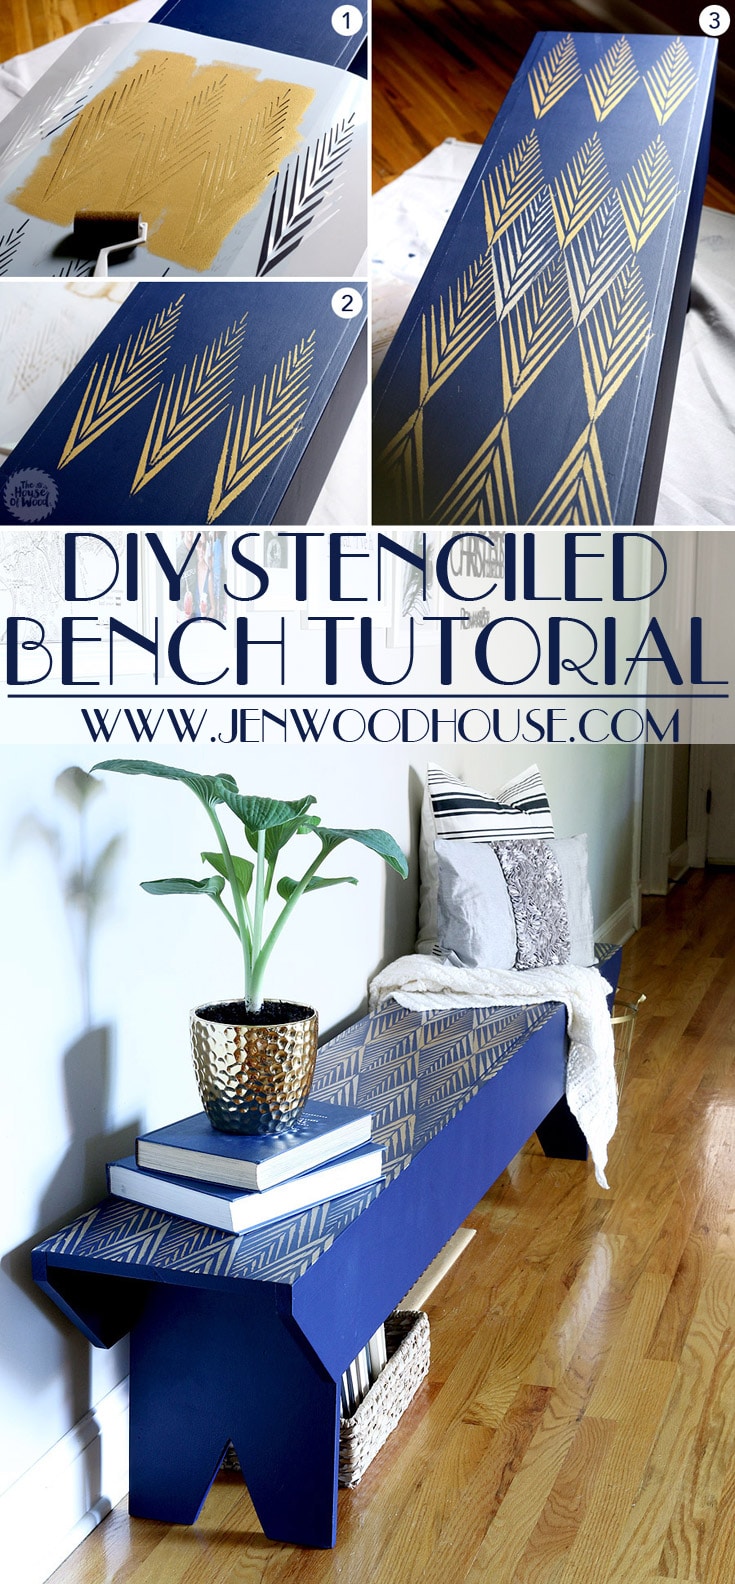 Great tutorial on how to stencil a DIY bench - gorgeous! She has plans on how to build the bench from scratch too!